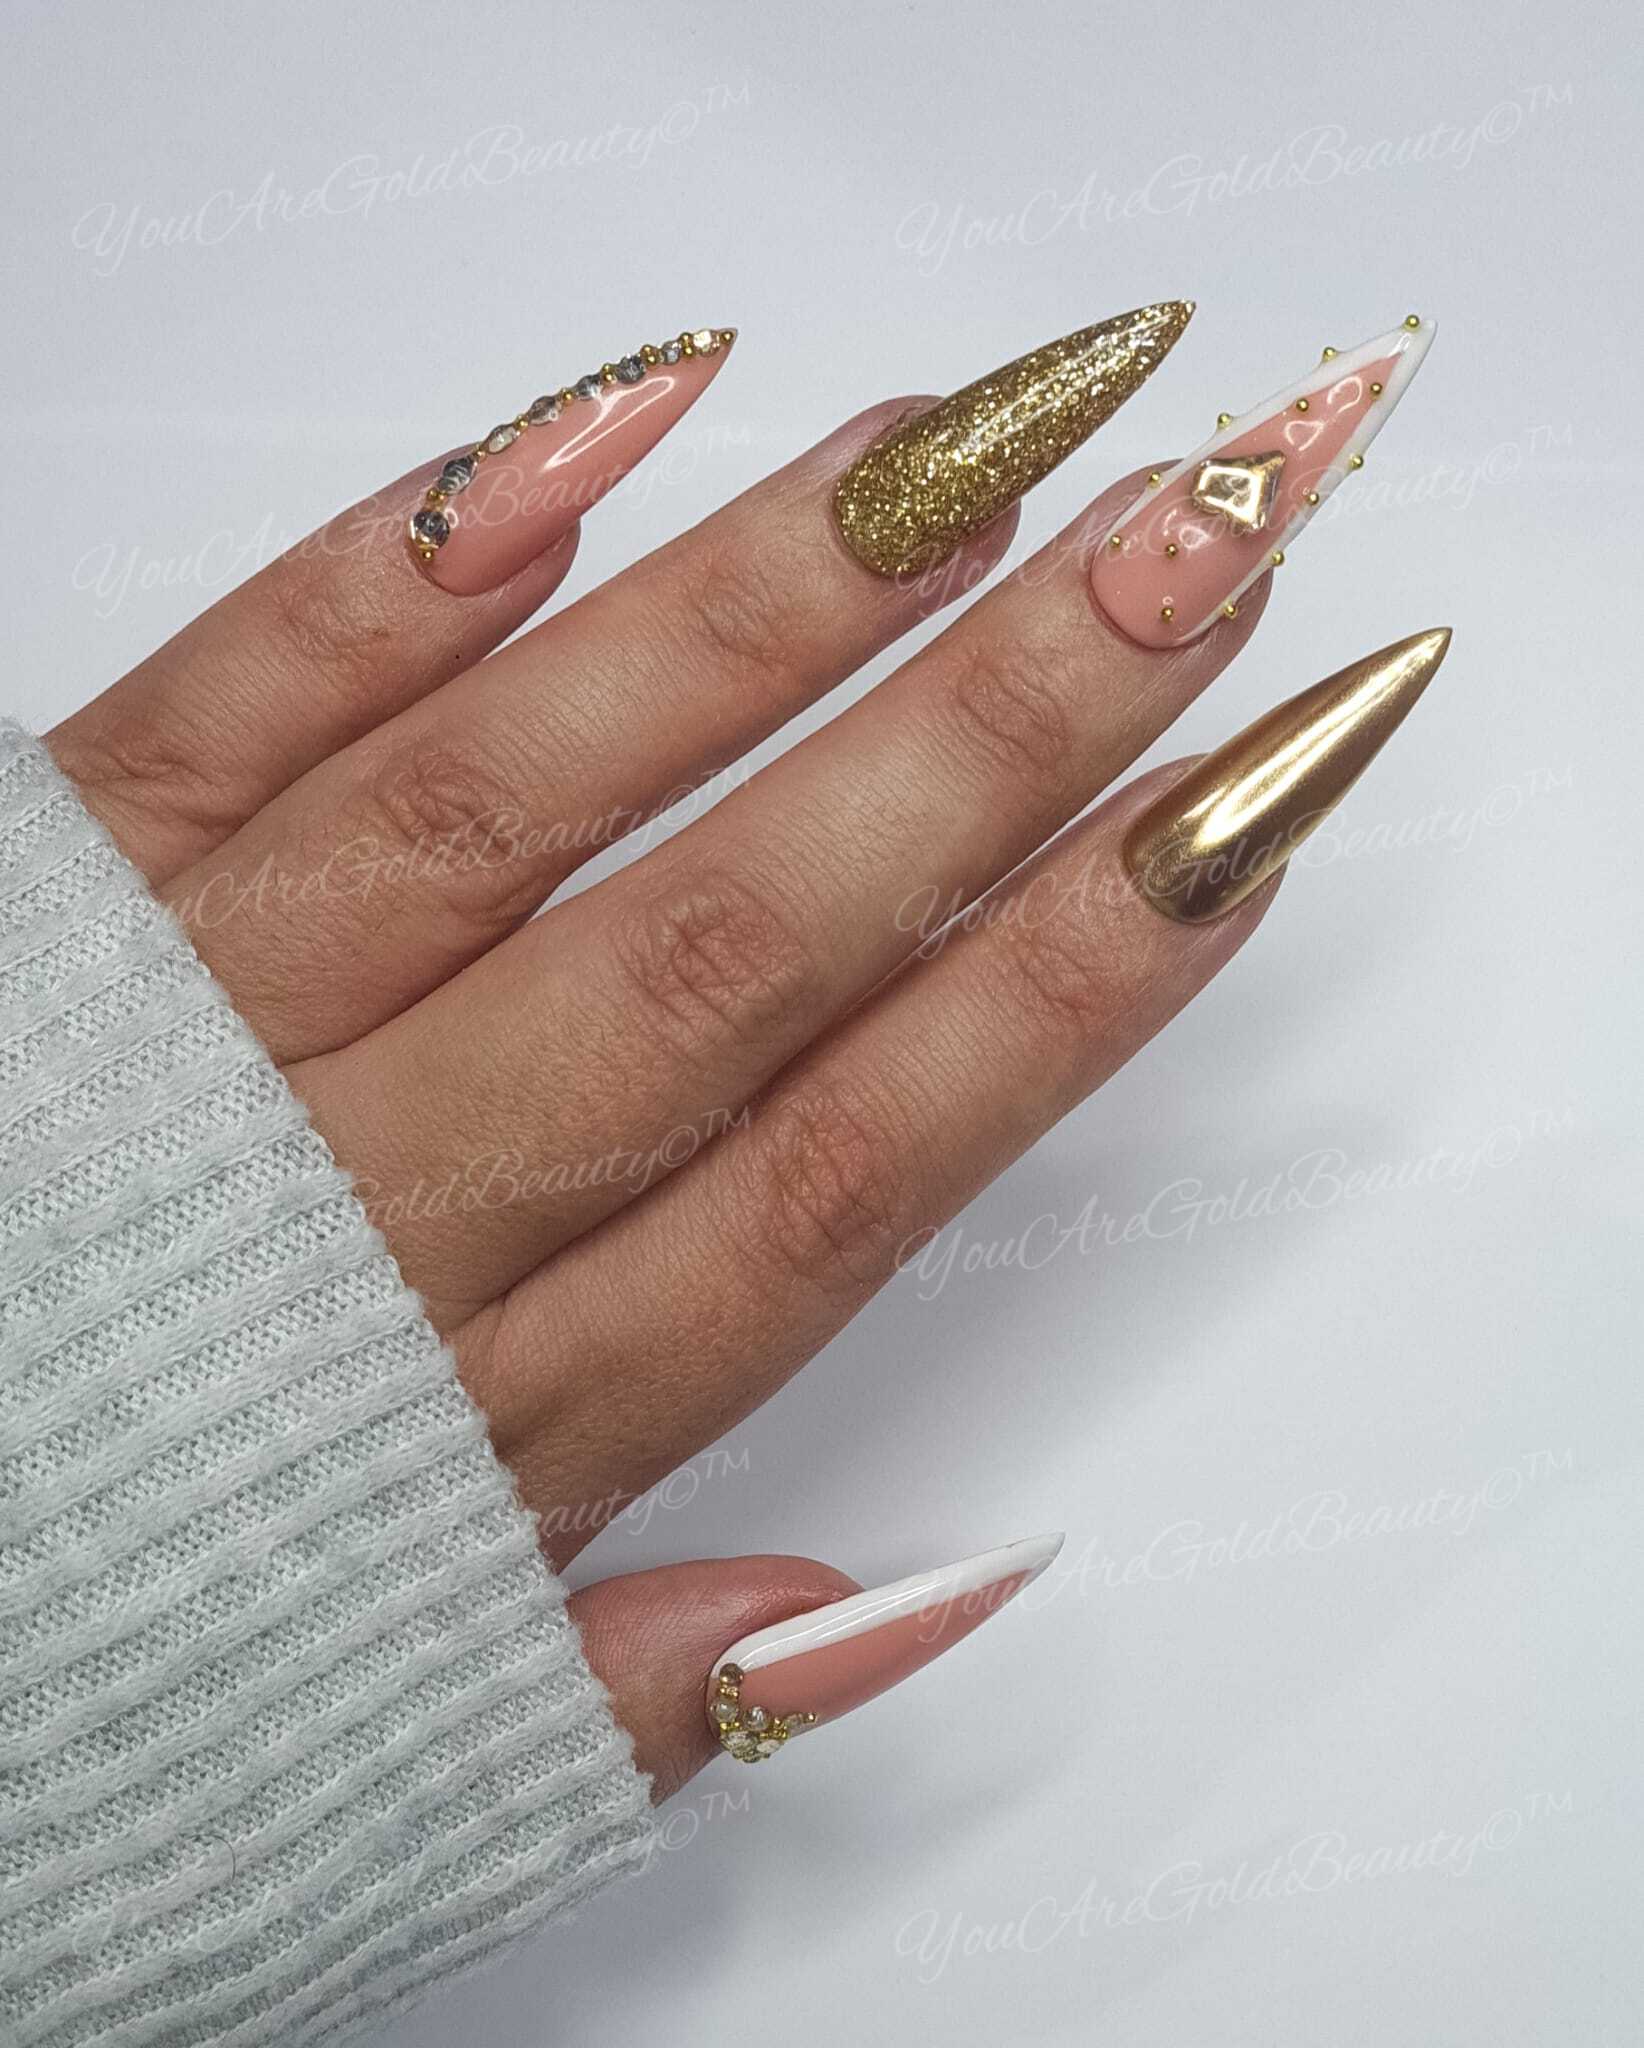 Stiletto Shaped nails Gold nail designs Gold glitter nails Gold Rhinestone nails Stiletto French tip designs 